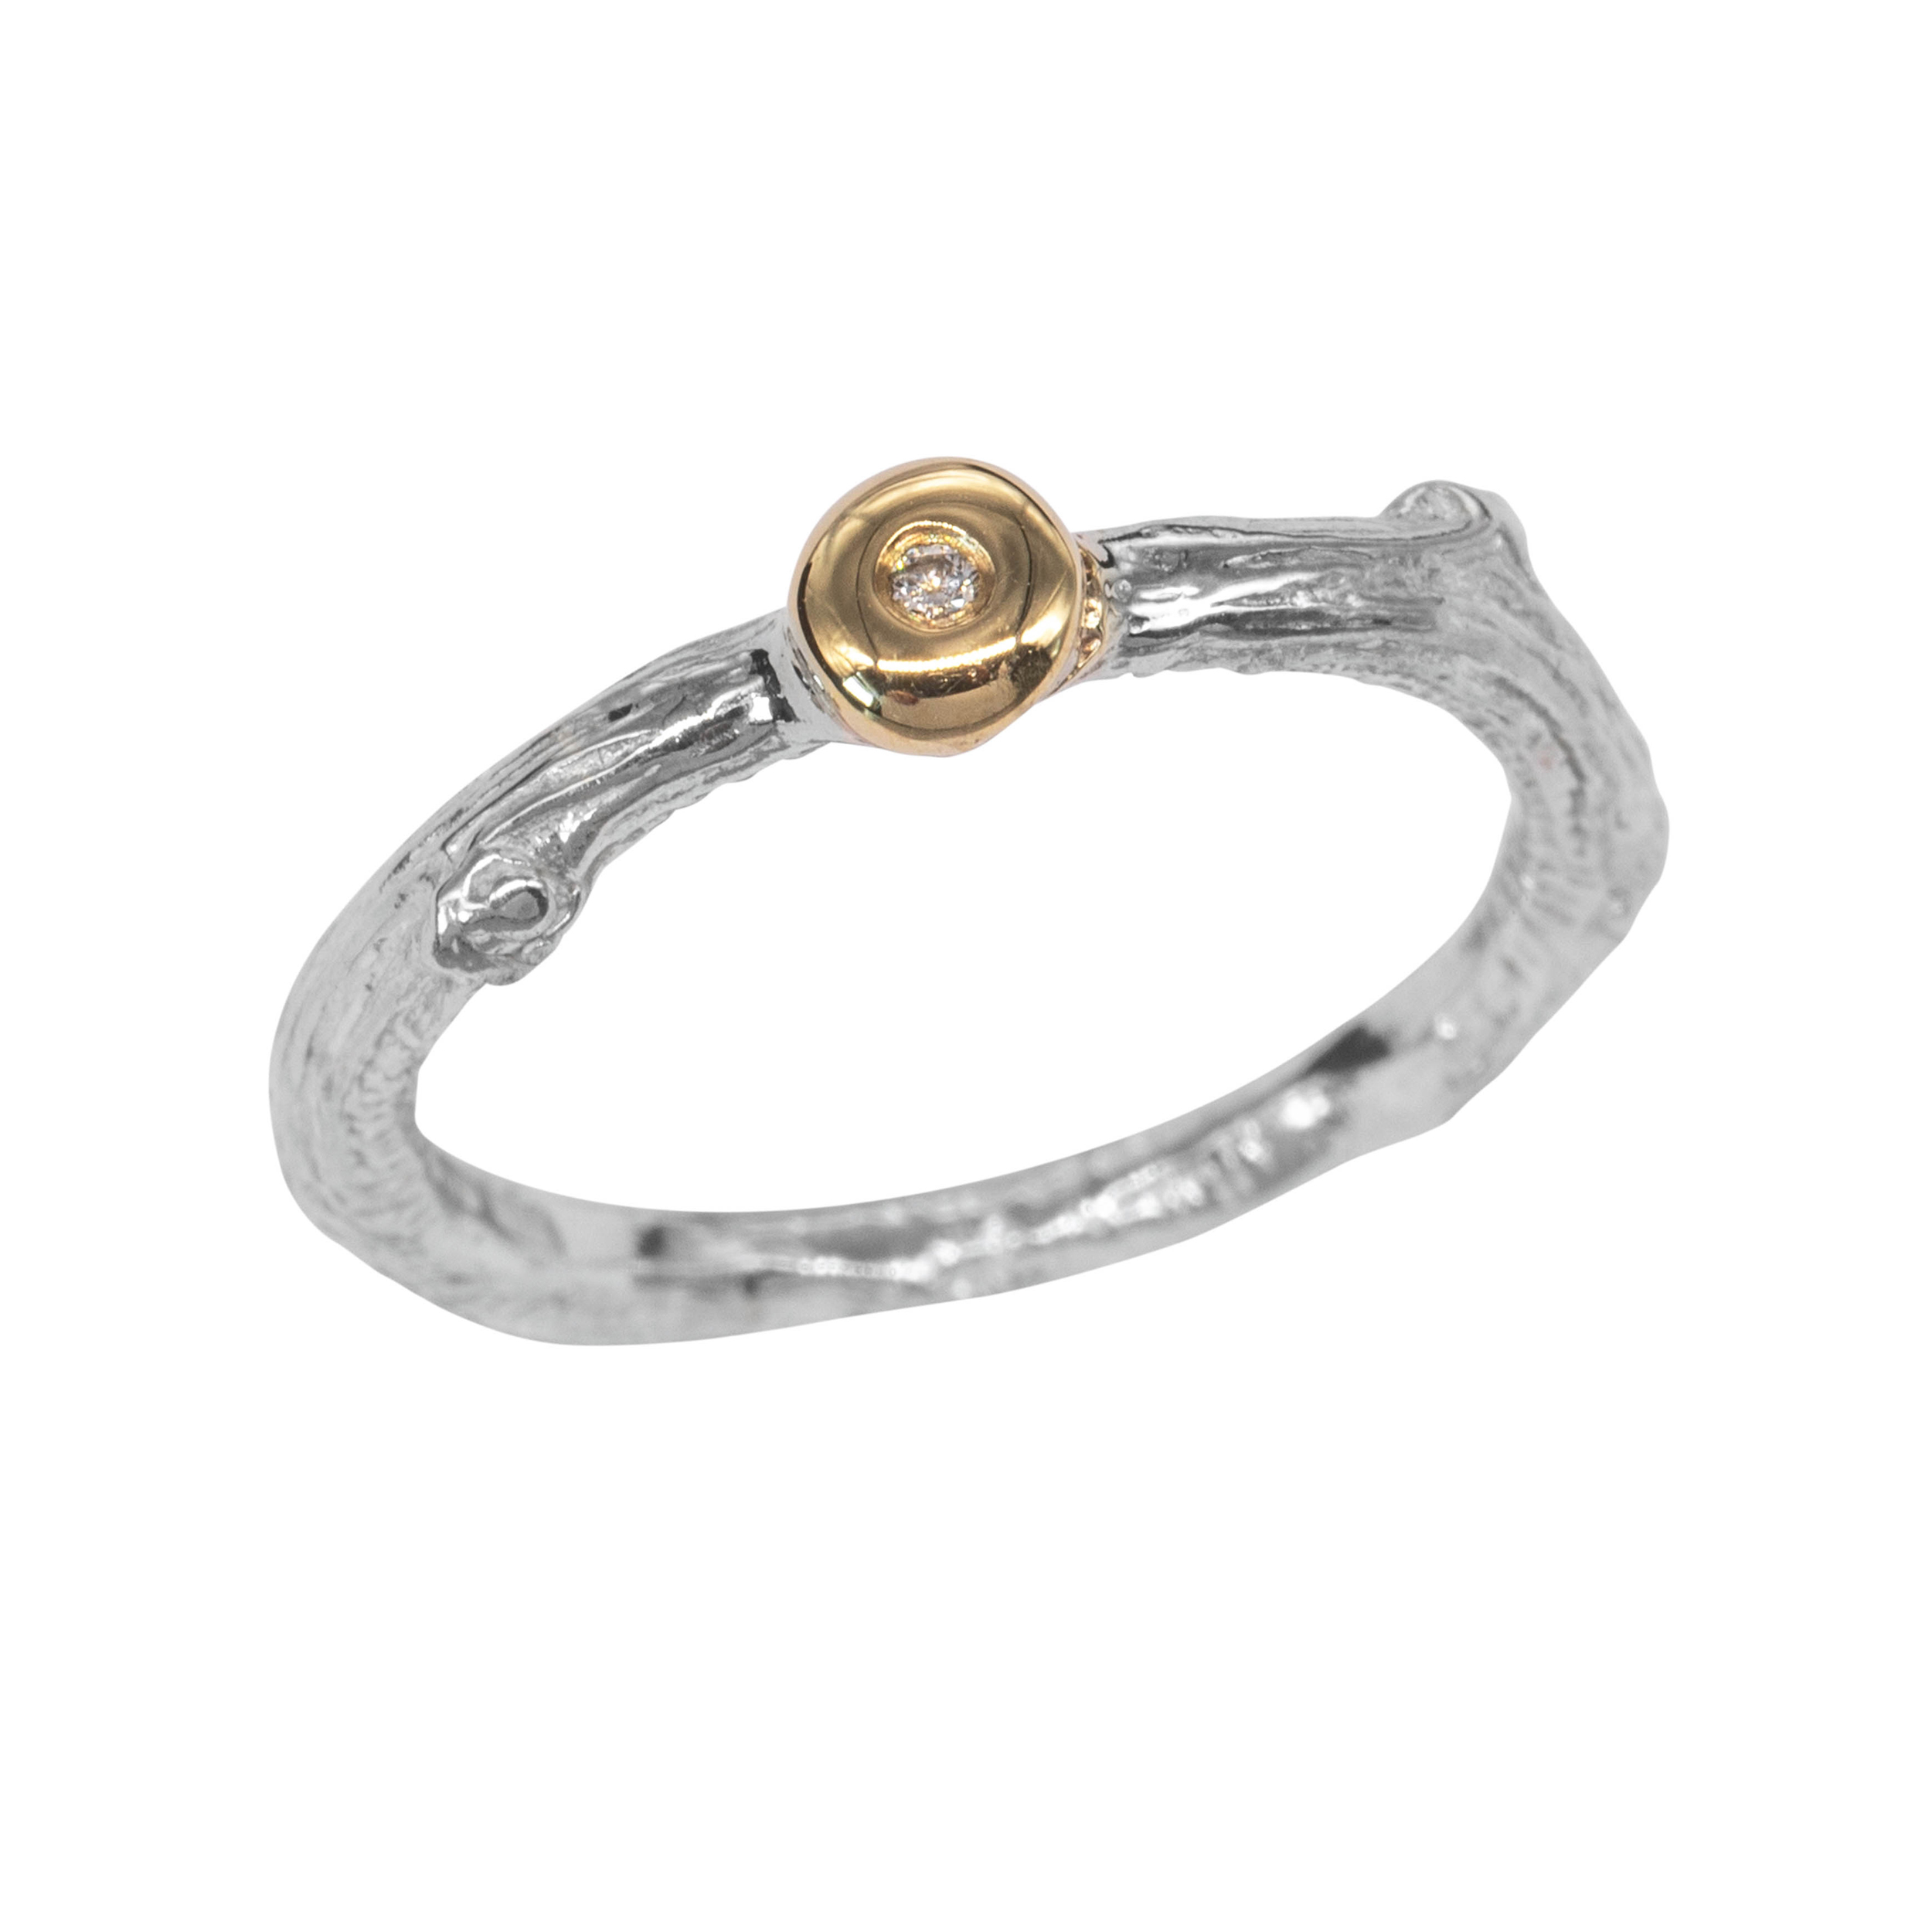 Silver ring with gold bud on front, set with a tiny diamond